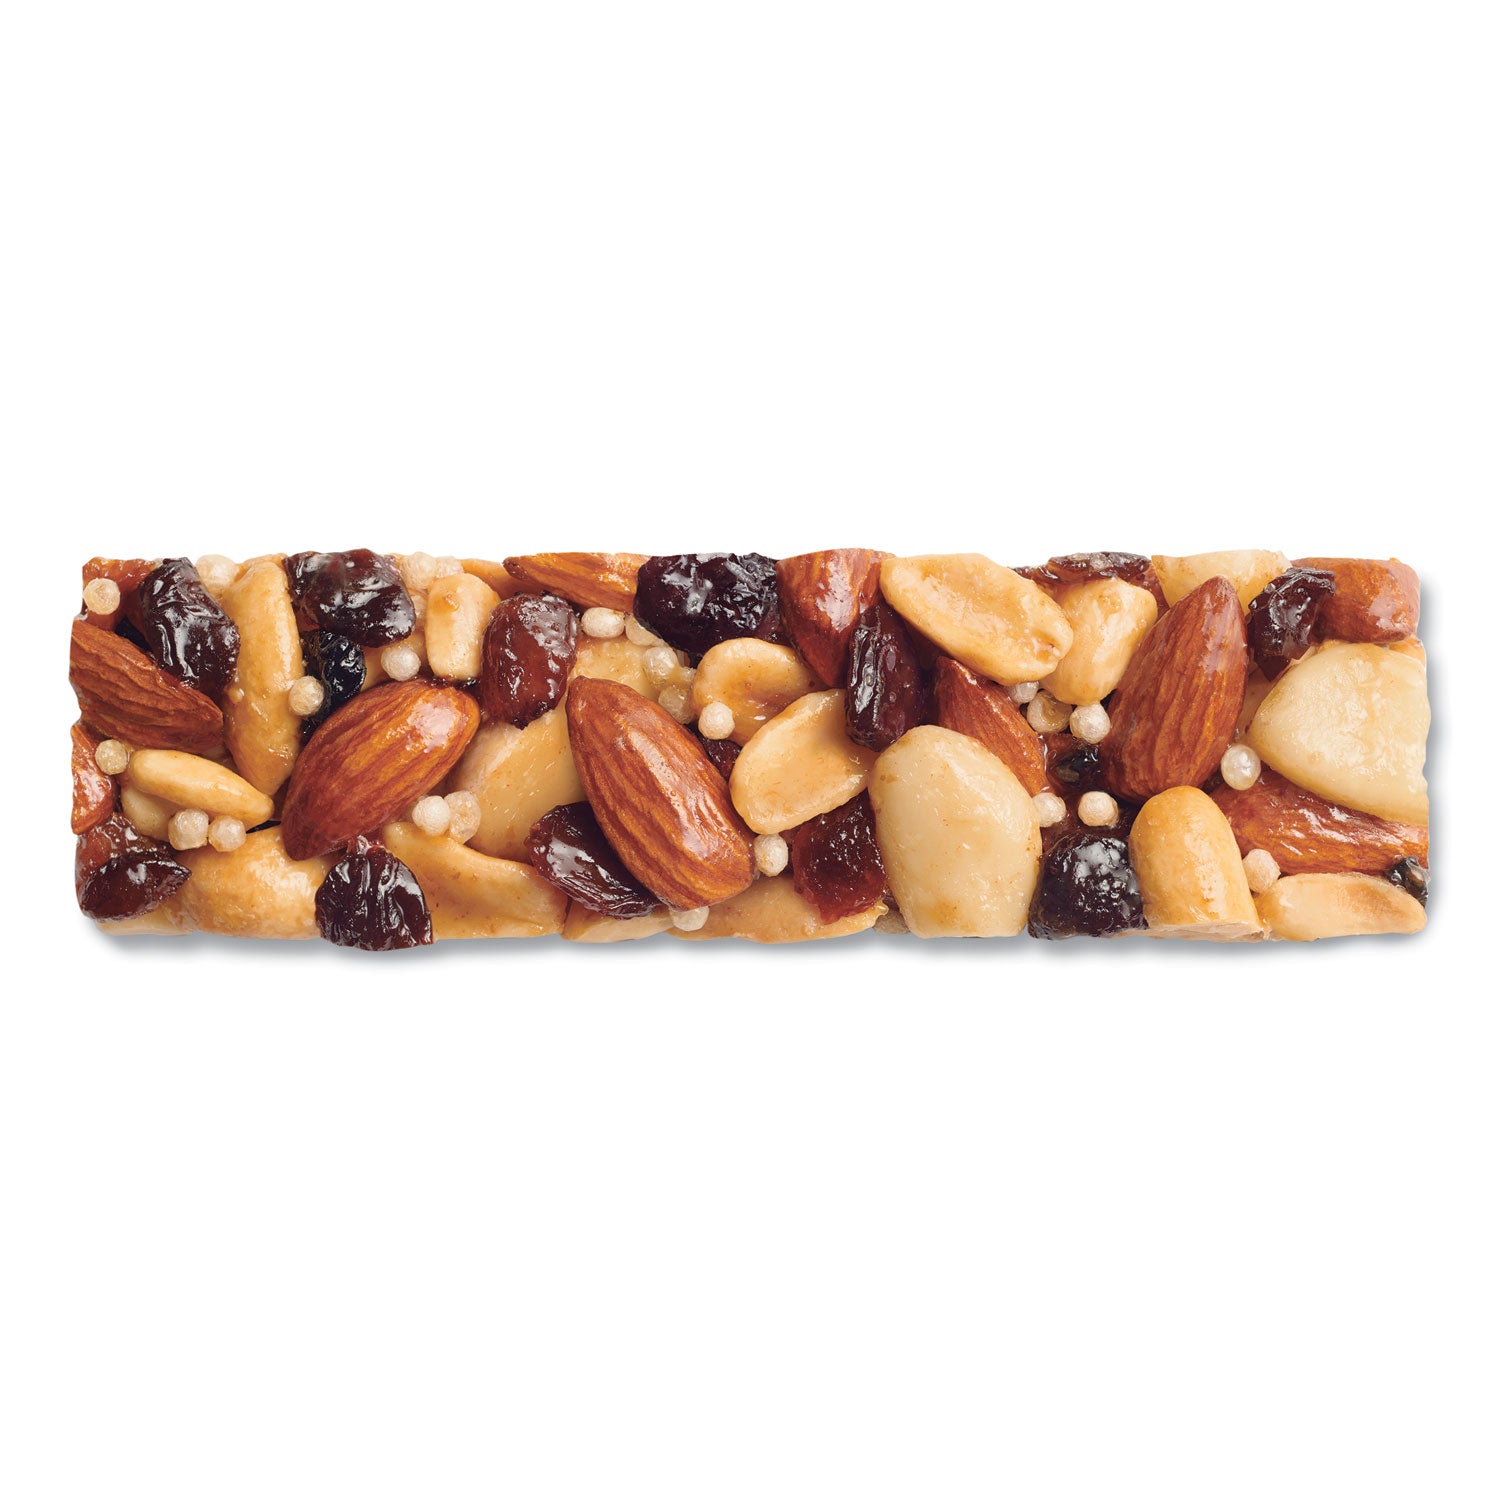 fruit-and-nut-bars-fruit-and-nut-delight-14-oz-12-box_knd17824 - 4